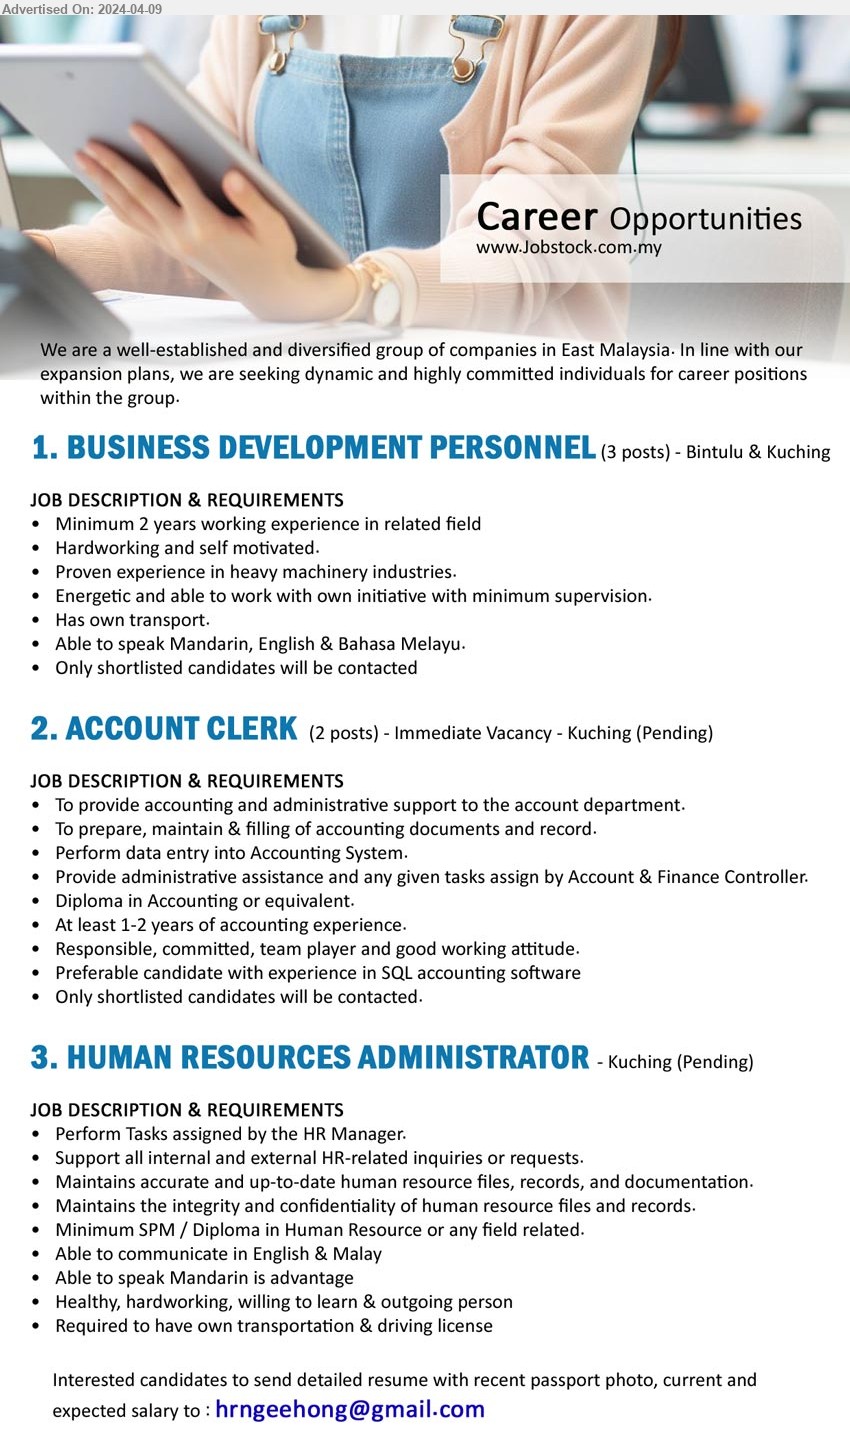 ADVERTISER - 1. BUSINESS DEVELOPMENT PERSONNEL (Kuching, Bintulu), 3 posts, 2 yrs. exp., Able to speak Mandarin, English & Bahasa Melayu.,...
2. ACCOUNT CLERK (Kuching), 2 posts, Diploma in Accounting or equivalent, At least 1-2 years of accounting experience.,...
3. HUMAN RESOURCES ADMINISTRATOR (Kuching), SPM / Diploma in Human Resource, Able to speak Mandarin is advantage,...
Email resume to ...
